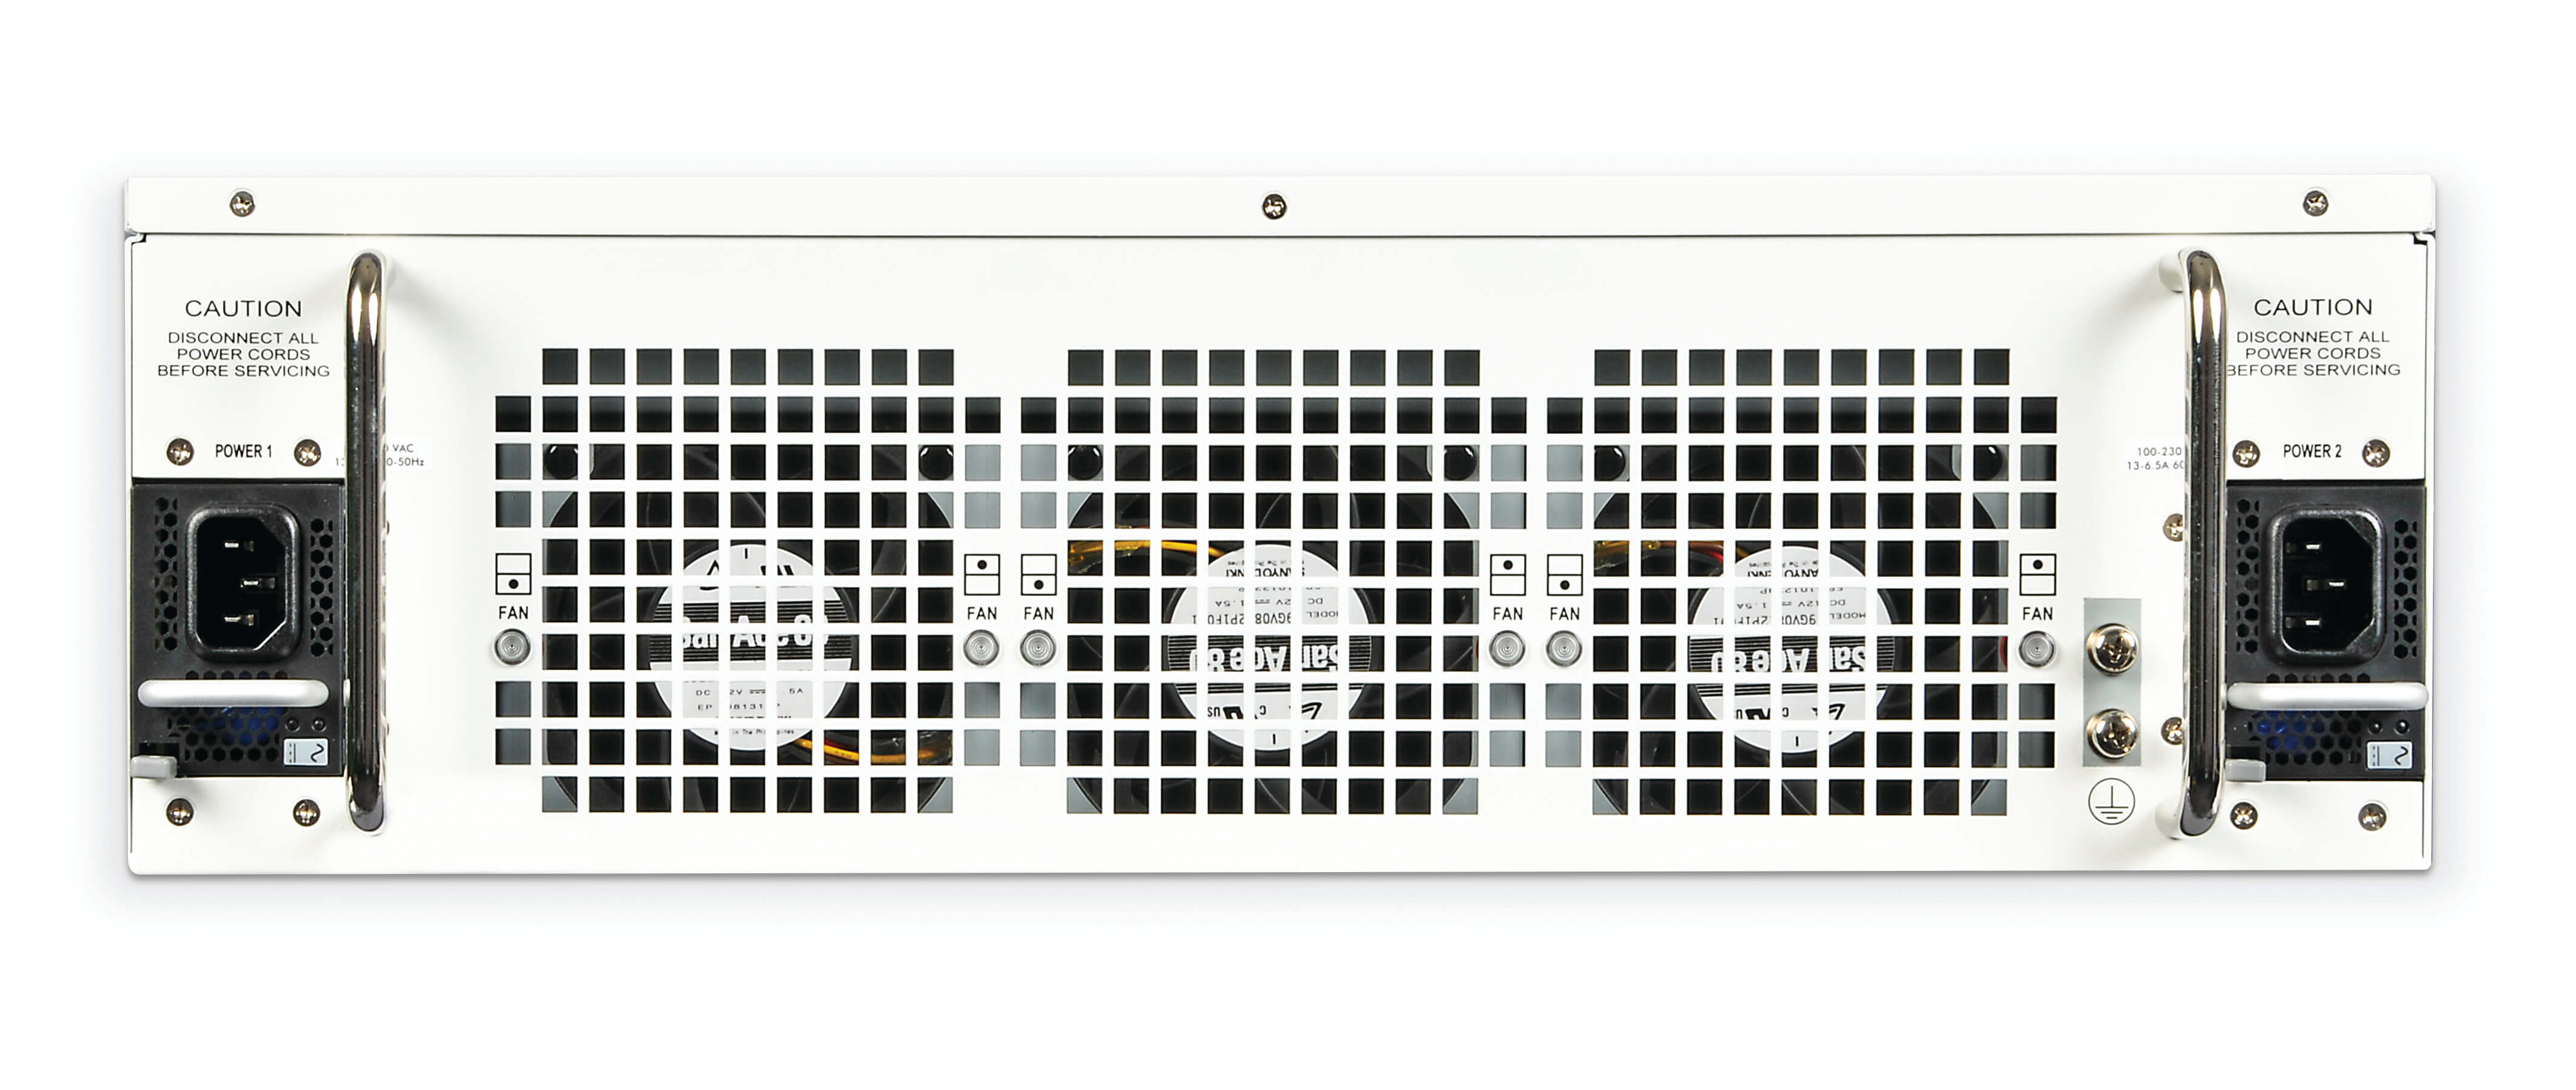 Fortinet FortiGate 3700D DC Firewall (End of Sale/Life)